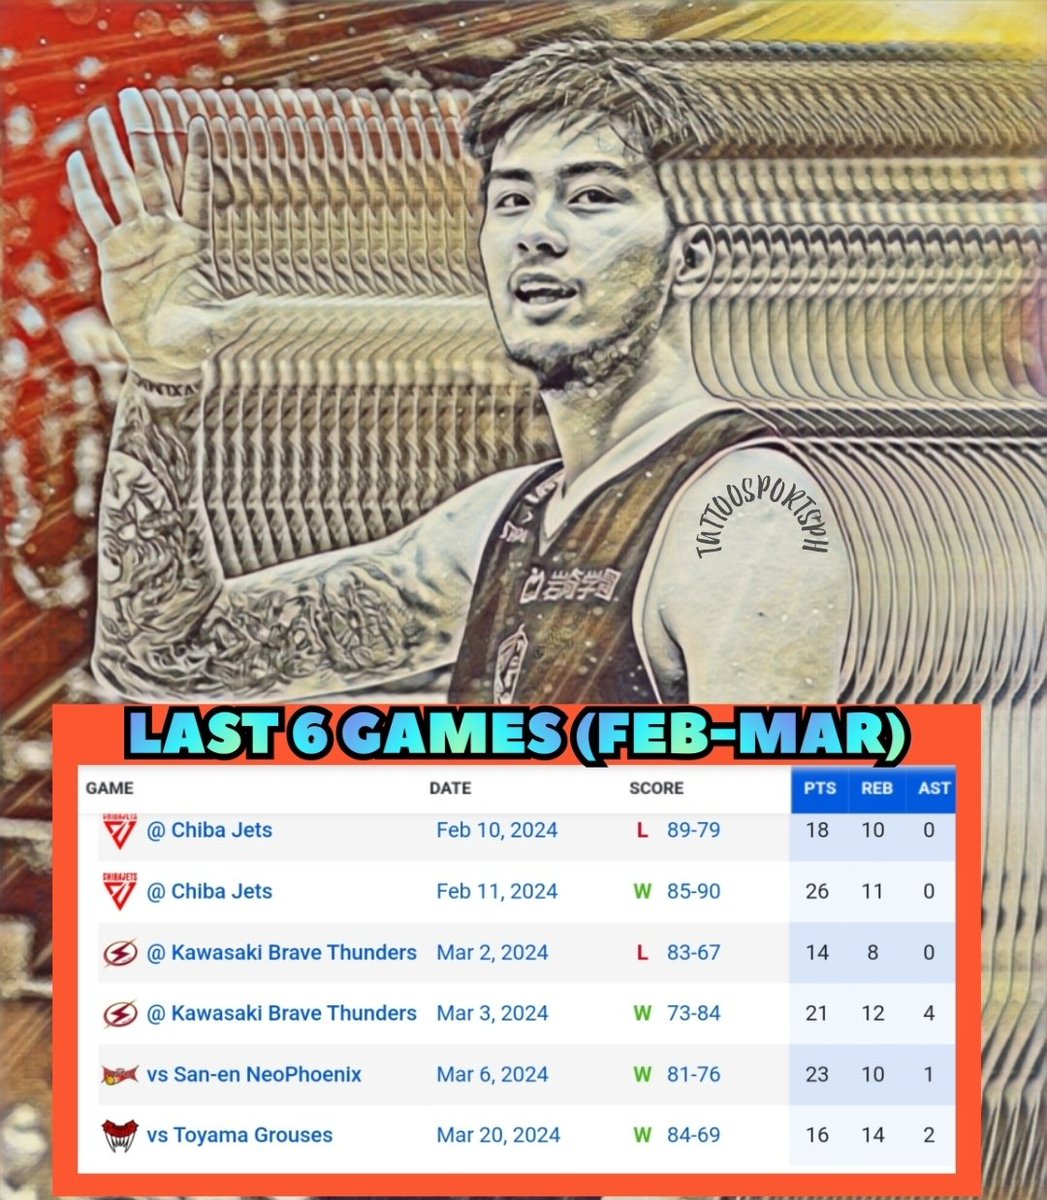 Kai sotto former adelaide 36ers in the nbl and now playing in japan b league (yokohama b corsairs)

Last 6 games February-march!

NUMBERS SPEAKS!

@NBL
 
@Adelaide36ers
 
@camluke
 
@Liam_Santa
 
@chomicide
 
@b_corsairs
 
@SixersFix
 
@NBABeau
 
@MickRandallHS
 
@aussiehoopla